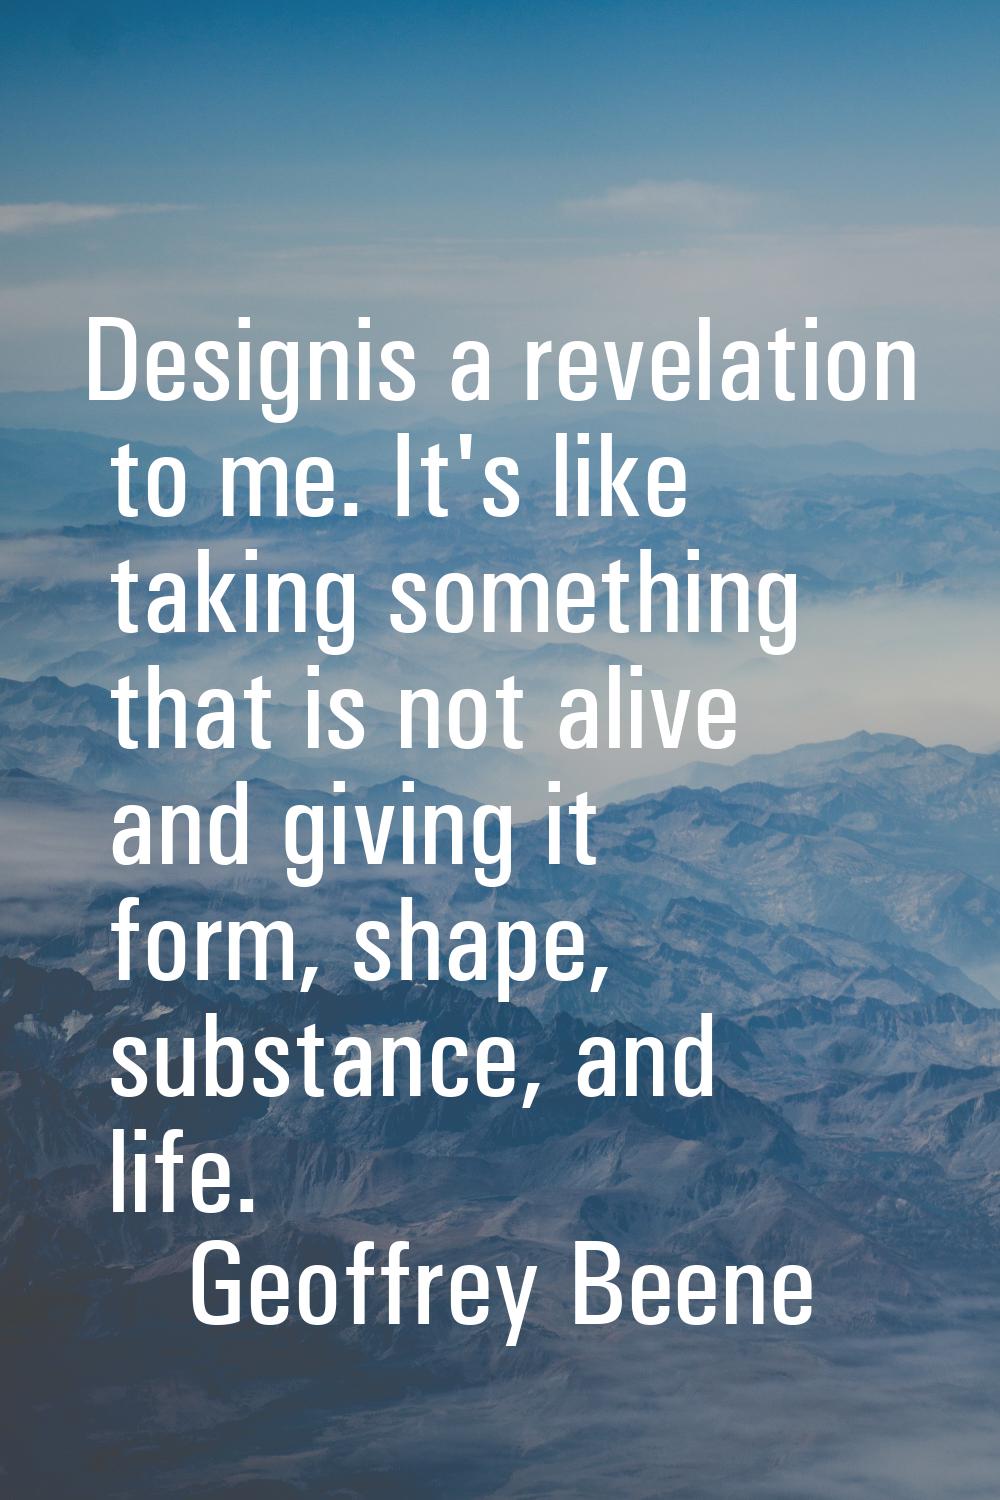 Designis a revelation to me. It's like taking something that is not alive and giving it form, shape